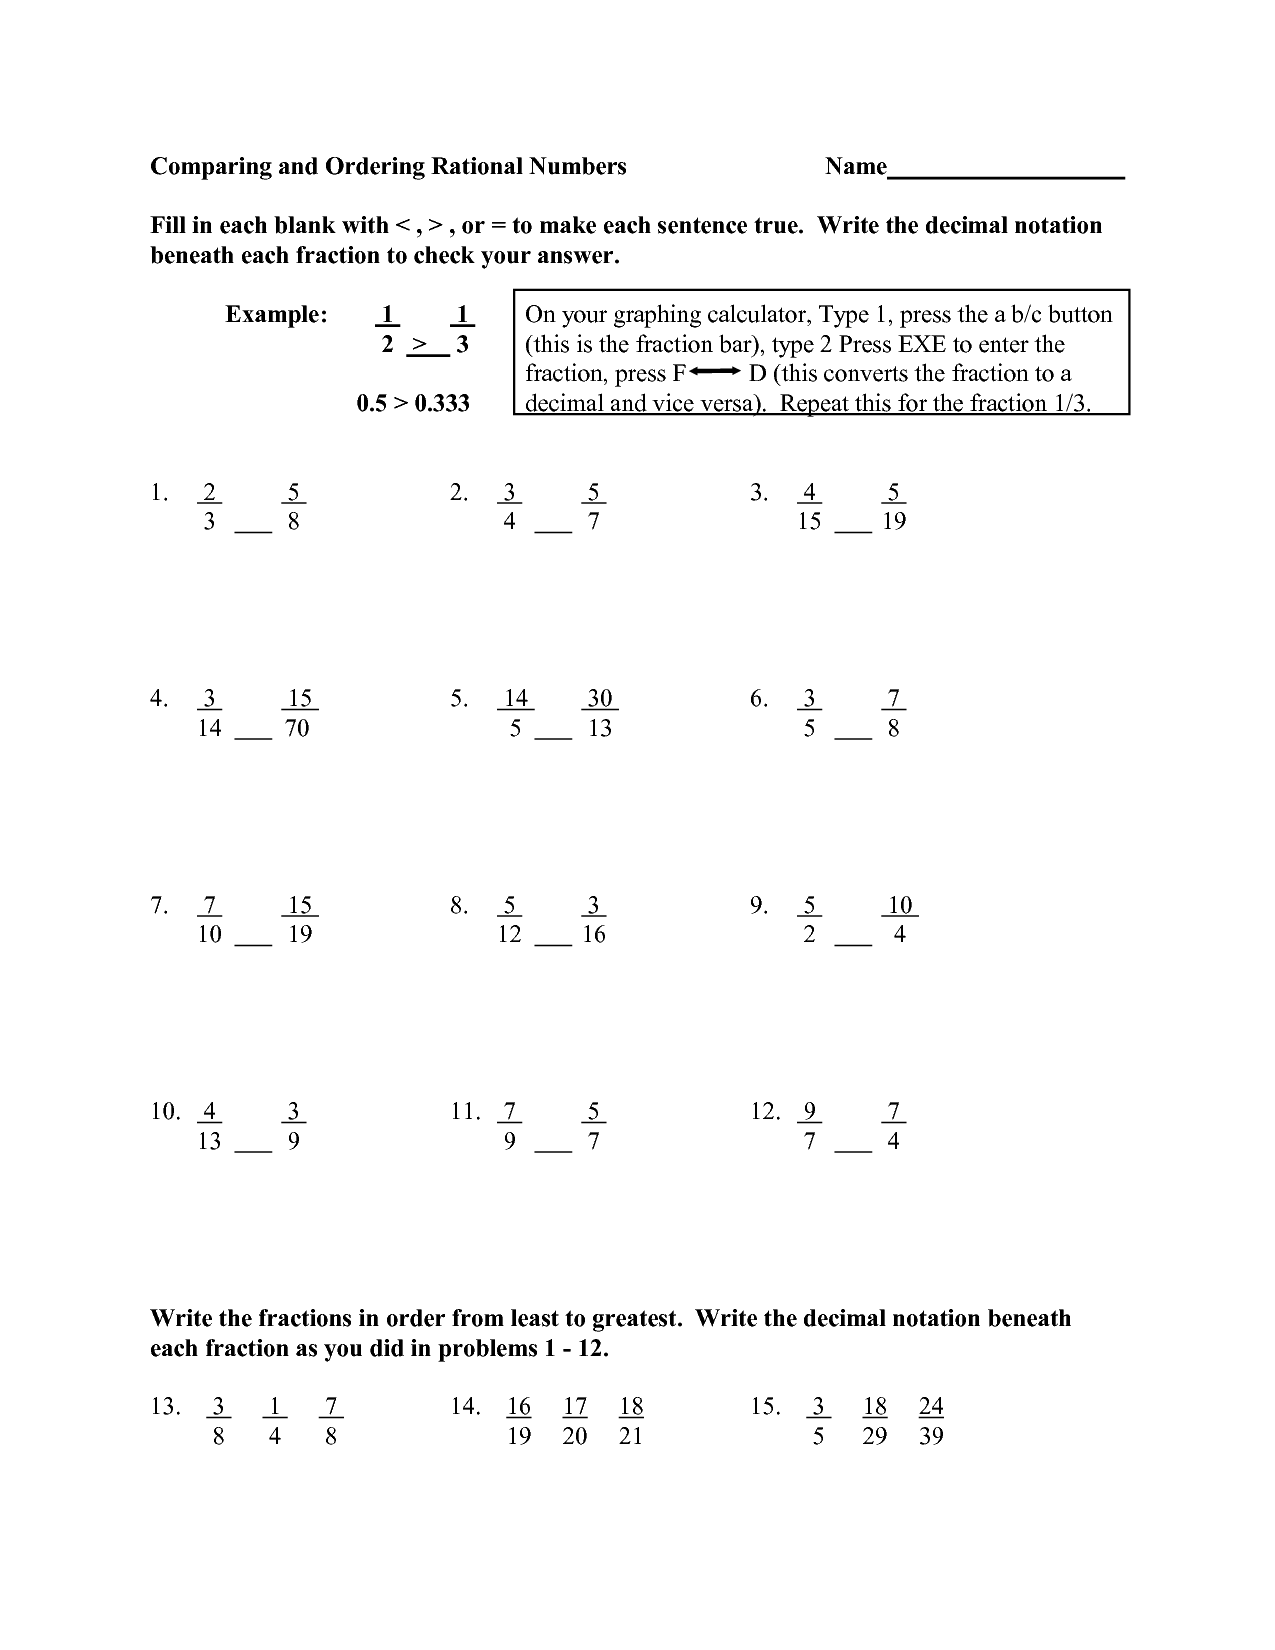 6-best-images-of-ordering-numbers-worksheets-grade-3-comparing-numbers-worksheet-ordering